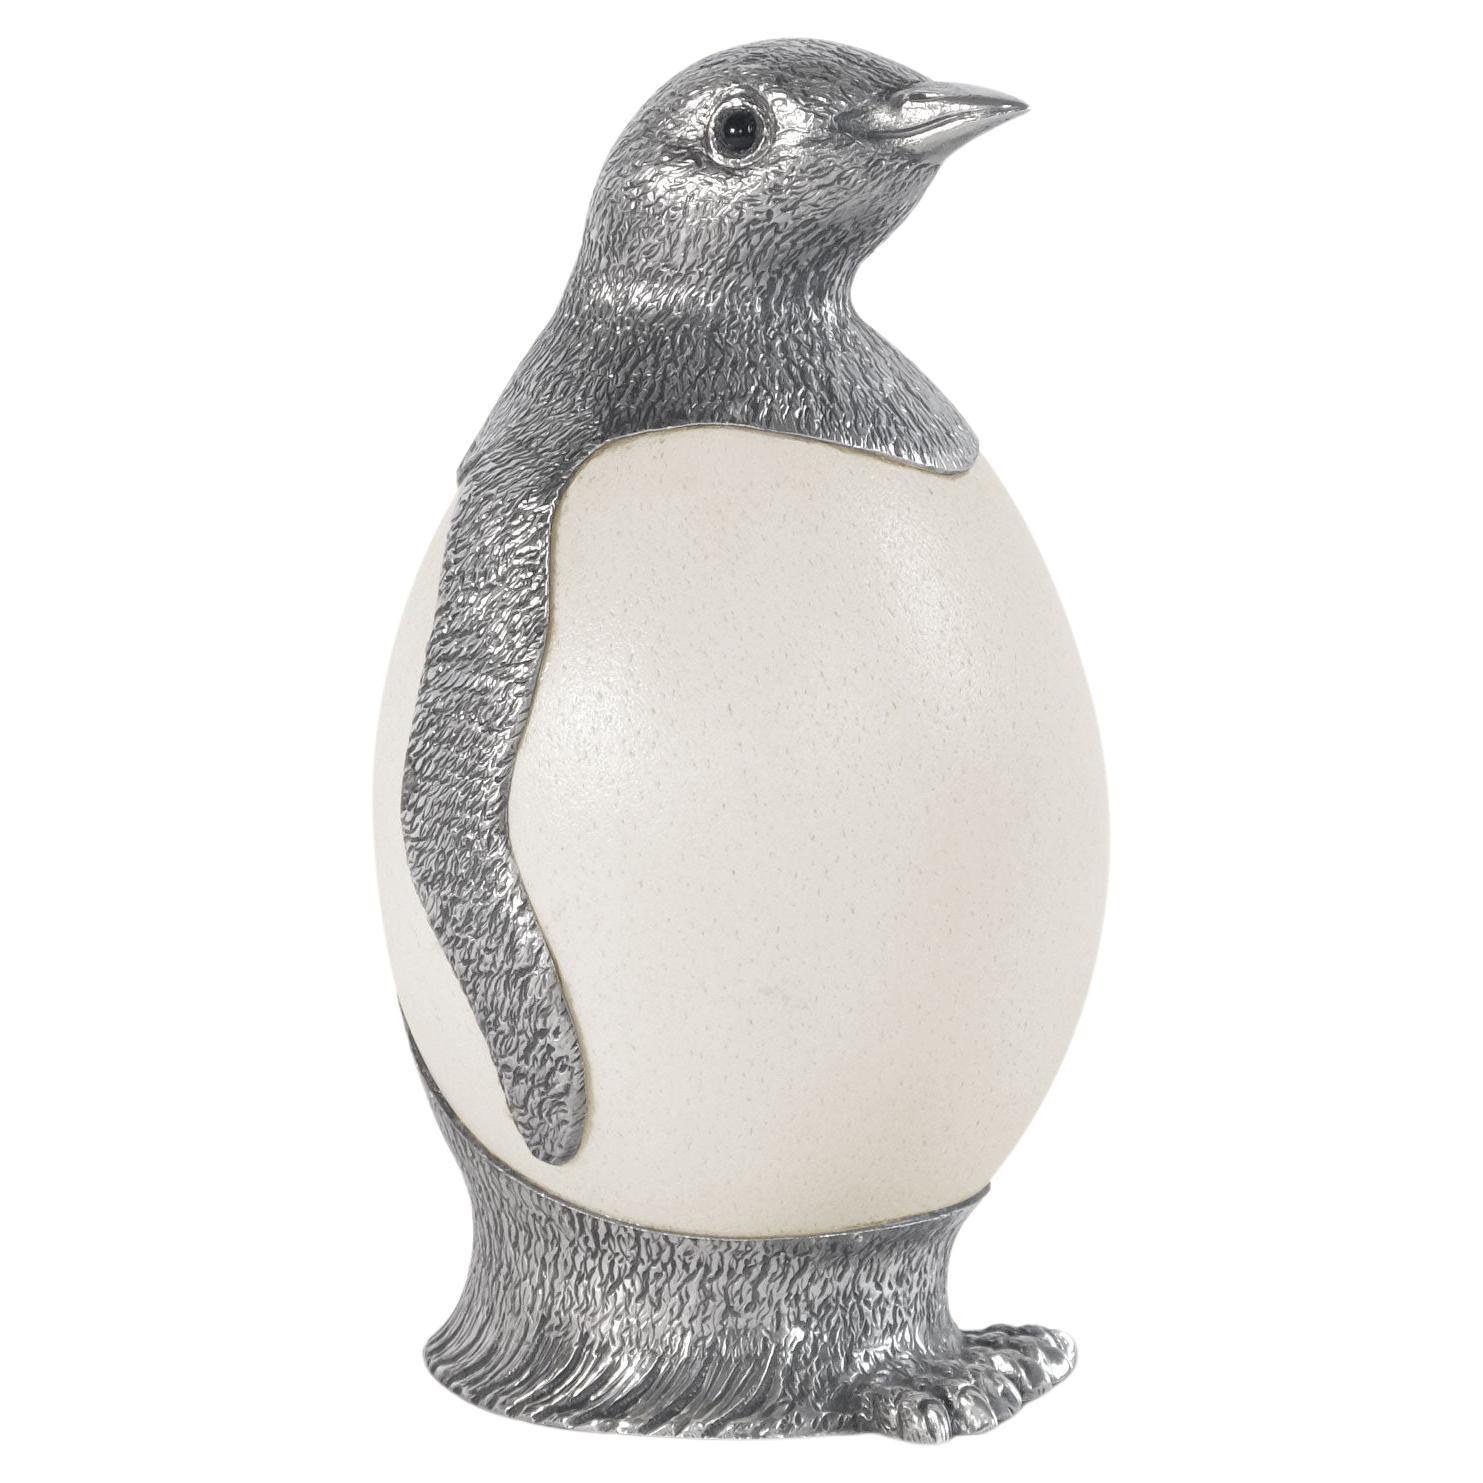 Penguin by Alcino Silversmith Handcrafted in Sterling Silver with Ostrich Egg For Sale